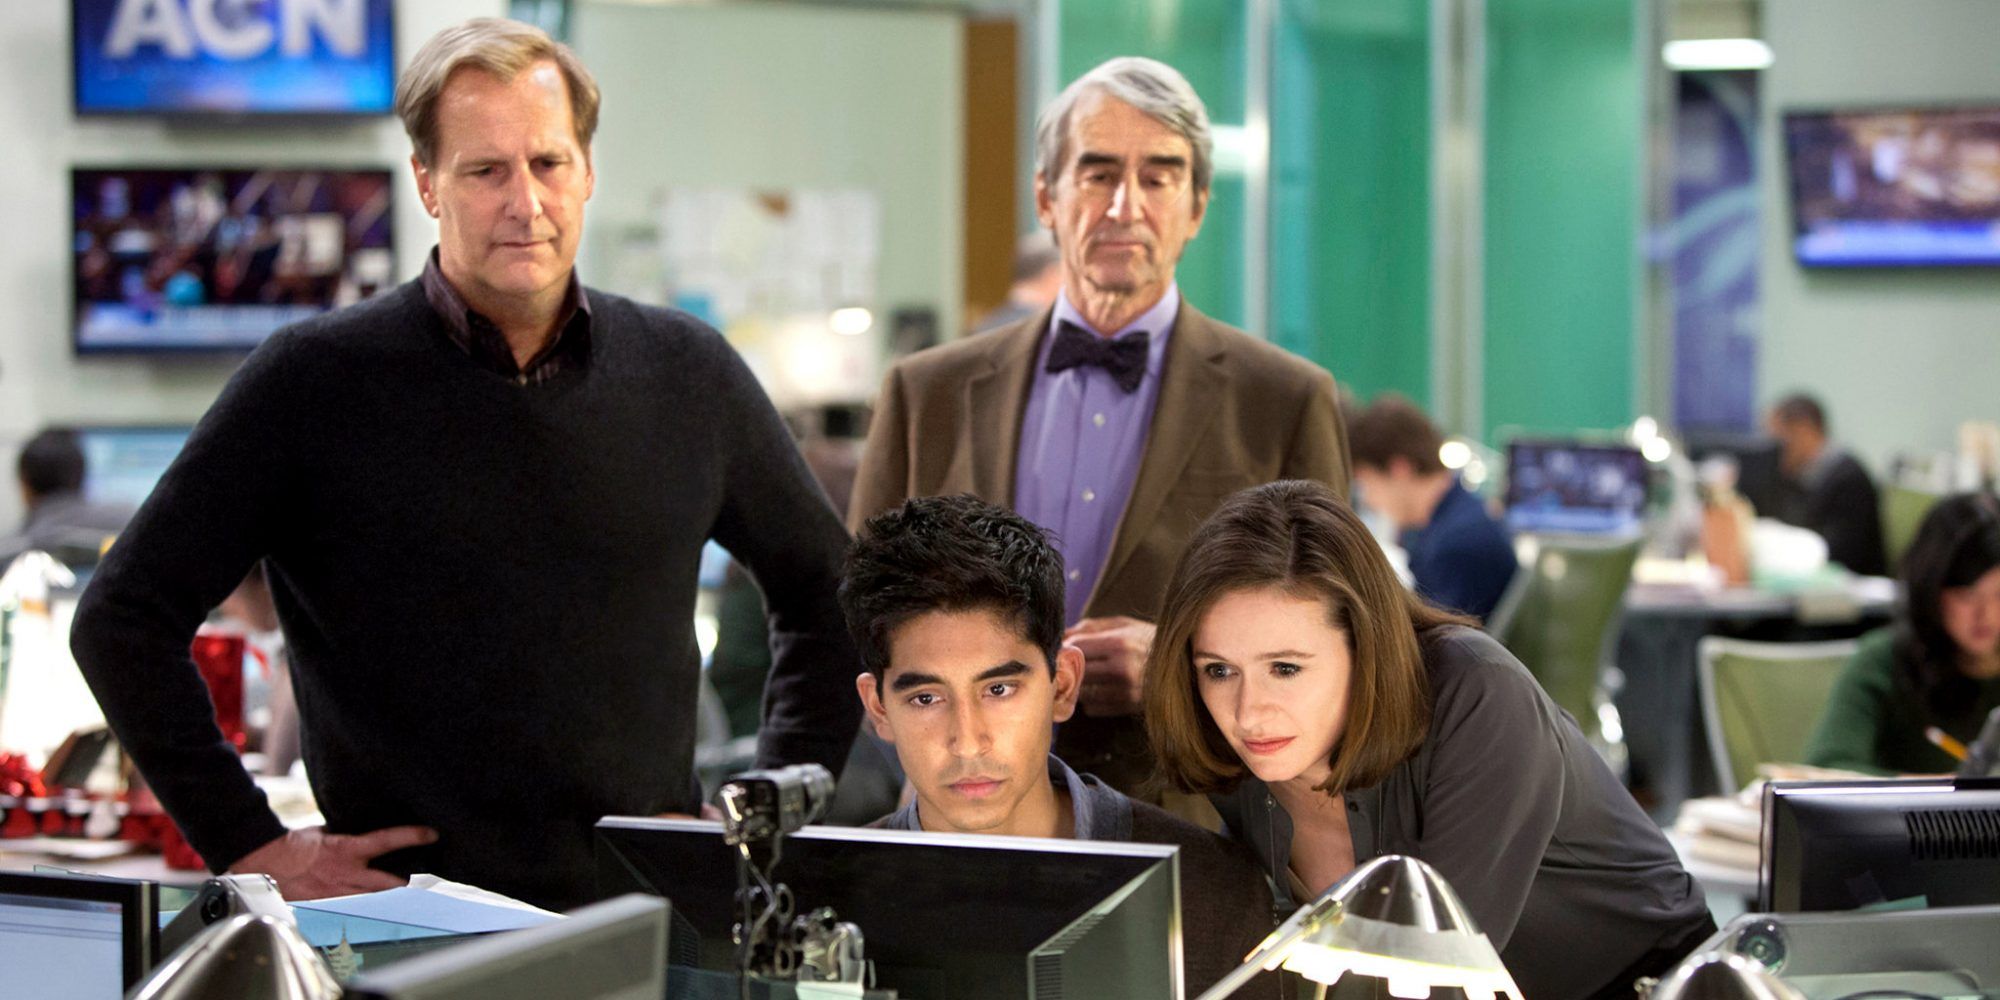 The main cast of The Newsroom TV show.